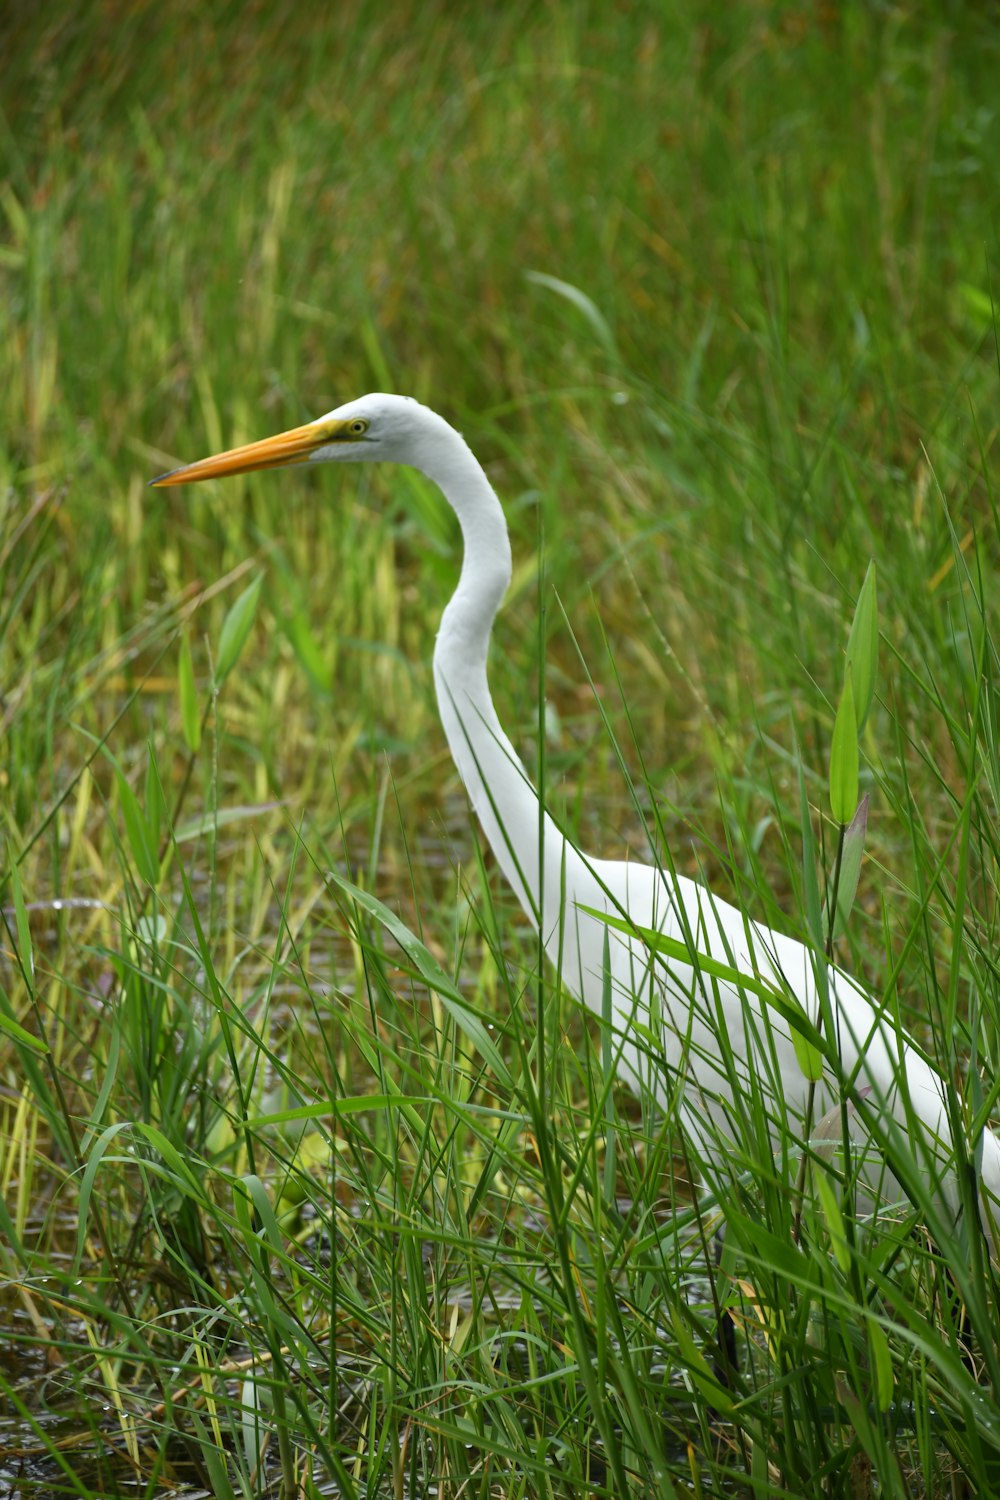 a white egret standing in a grassy field